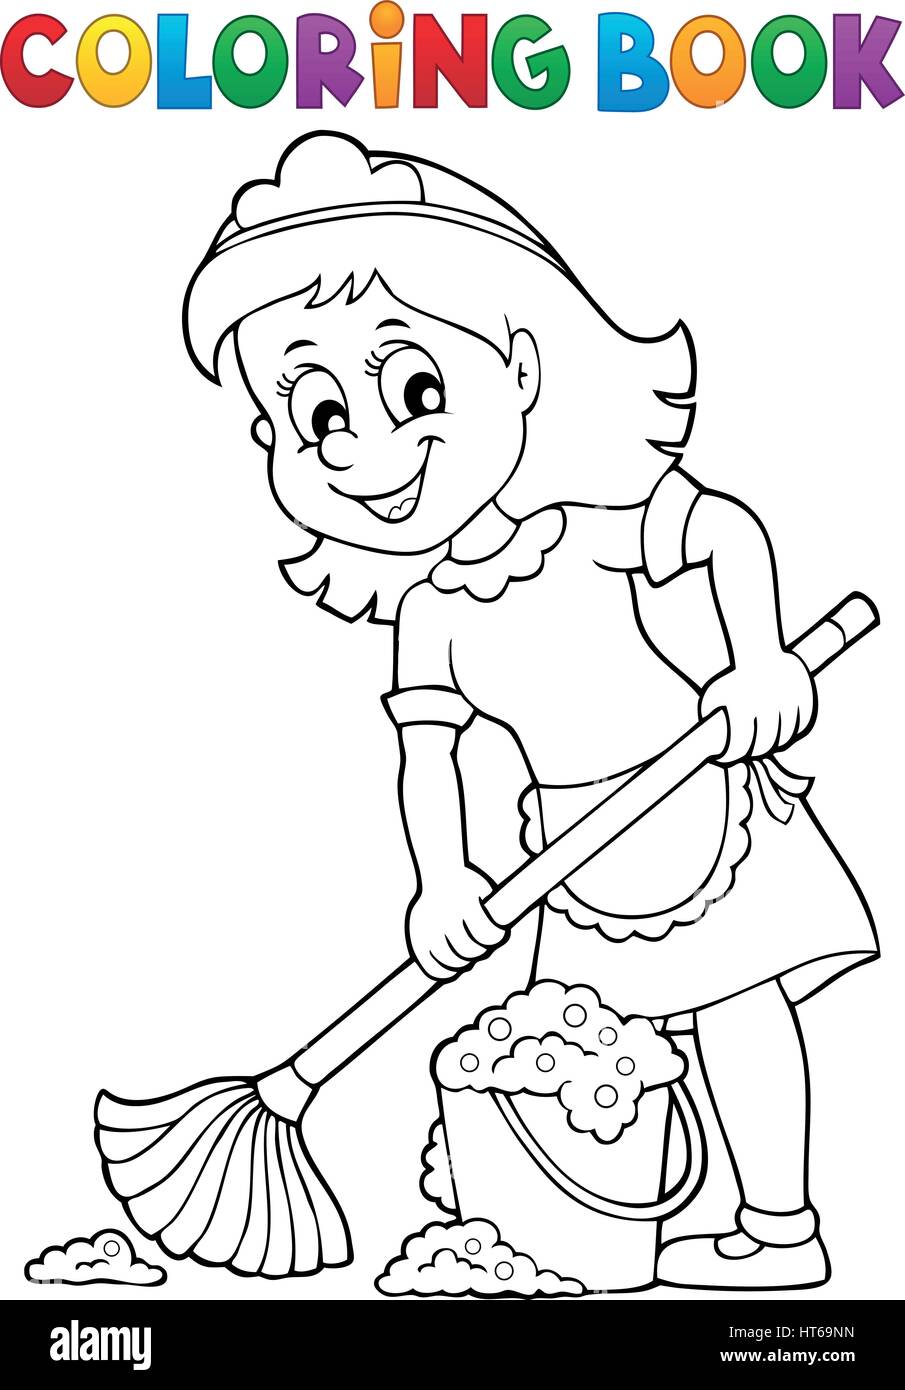 Coloring Book Cleaning Lady 2 Eps10 Vector Illustration Stock Vector Image Art Alamy